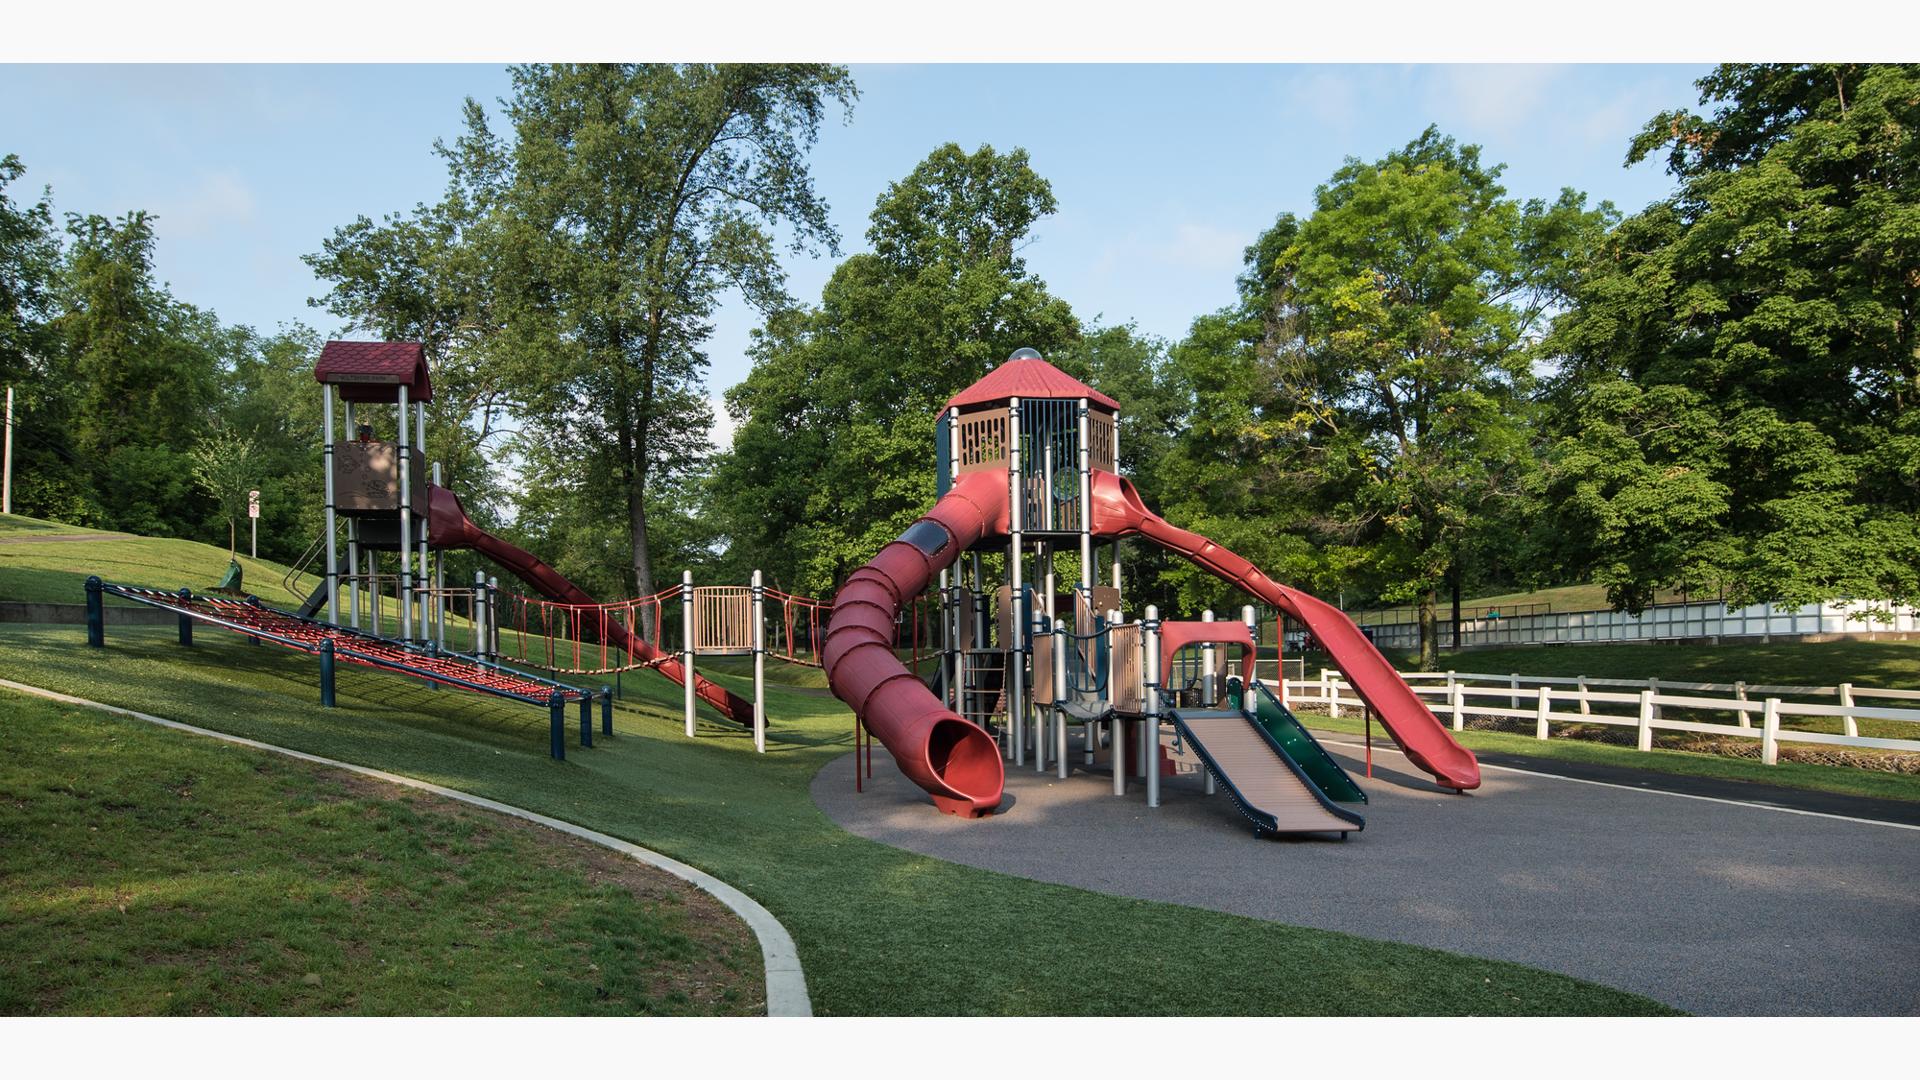 Untouched PlayBooster playground with a plethora of climbers and playground activities to thrill kids.